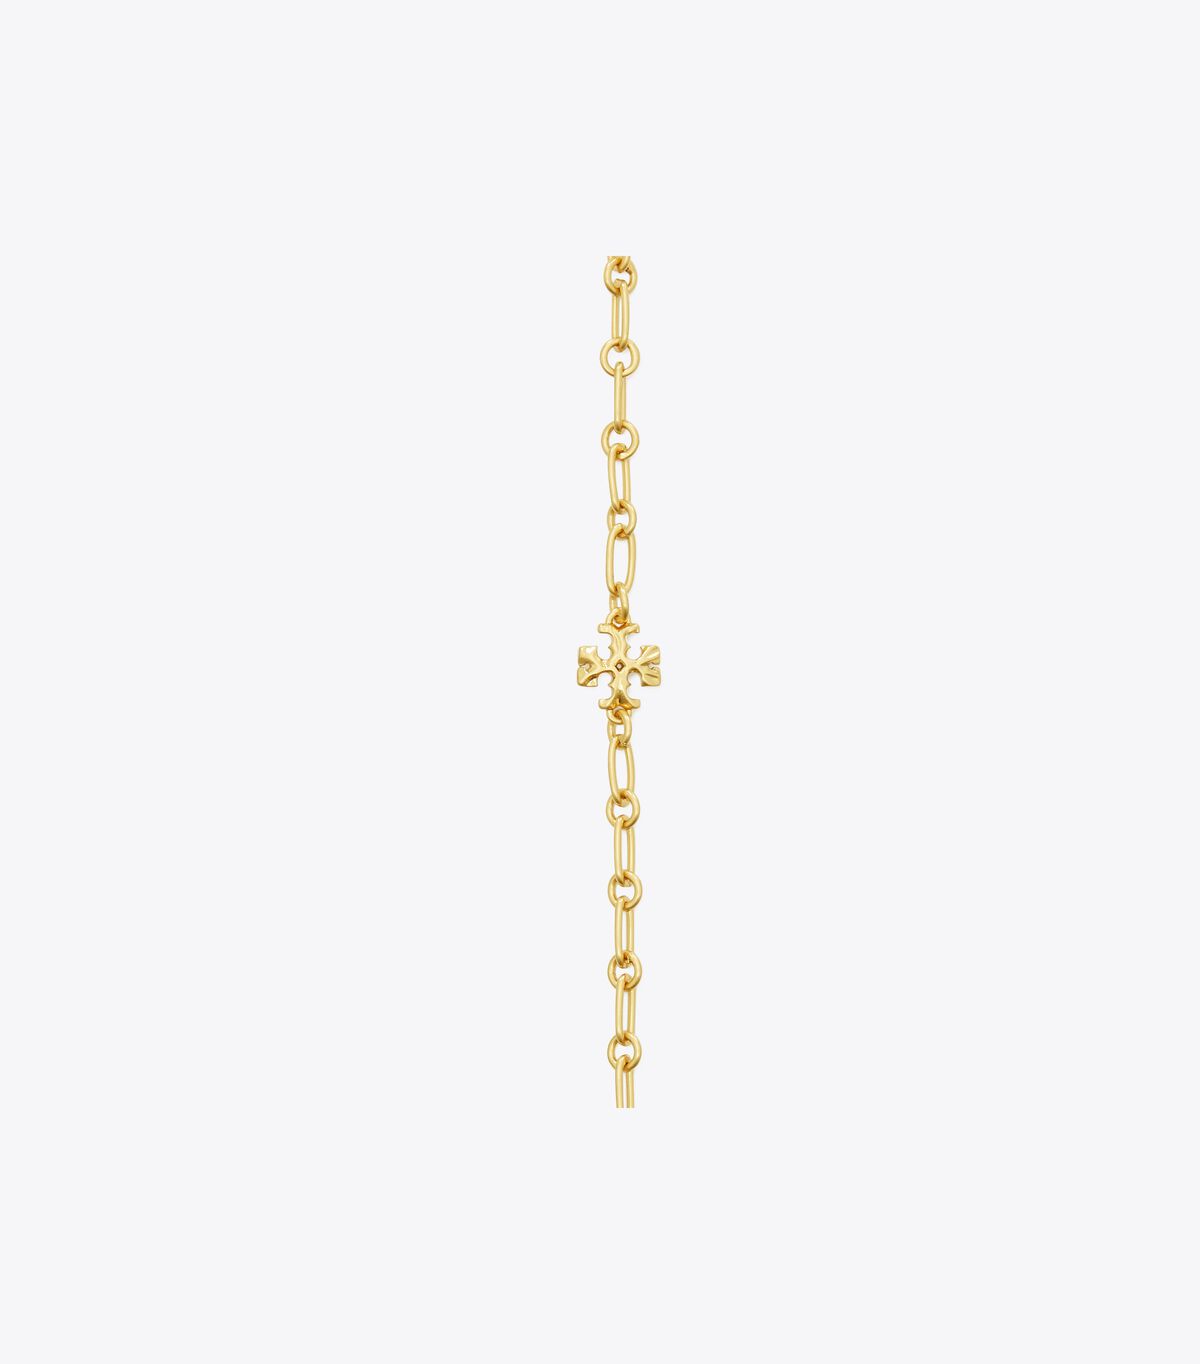 Roxanne Chain Delicate Necklace